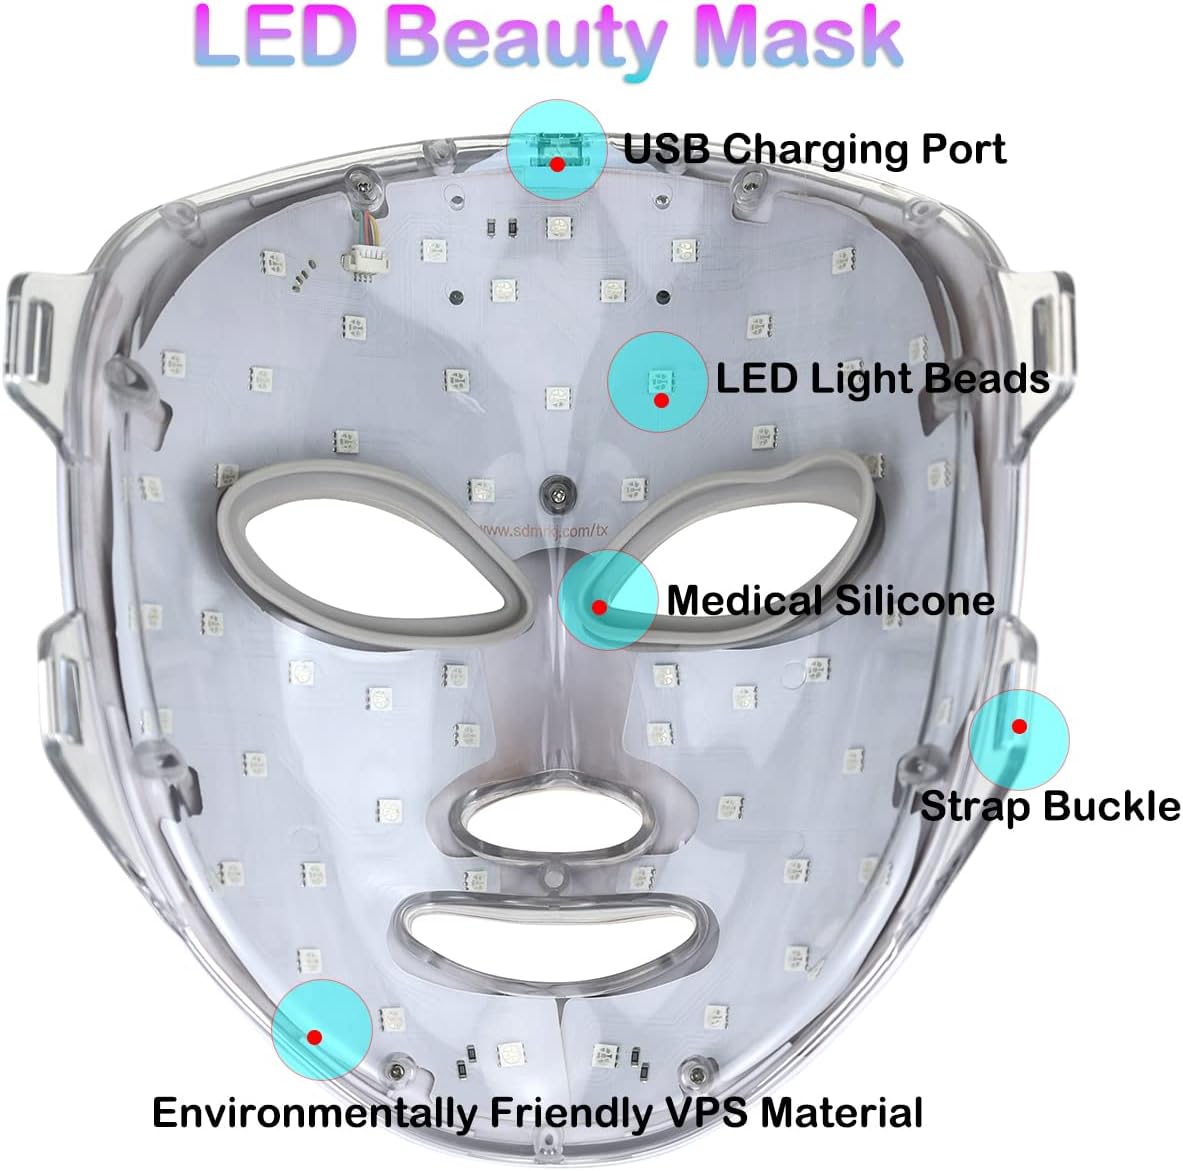 No Cables Led Face Mask Light Therapy, 7 Color Therapy Facial Skin Care Mask, Blue & Red Light Skin Care